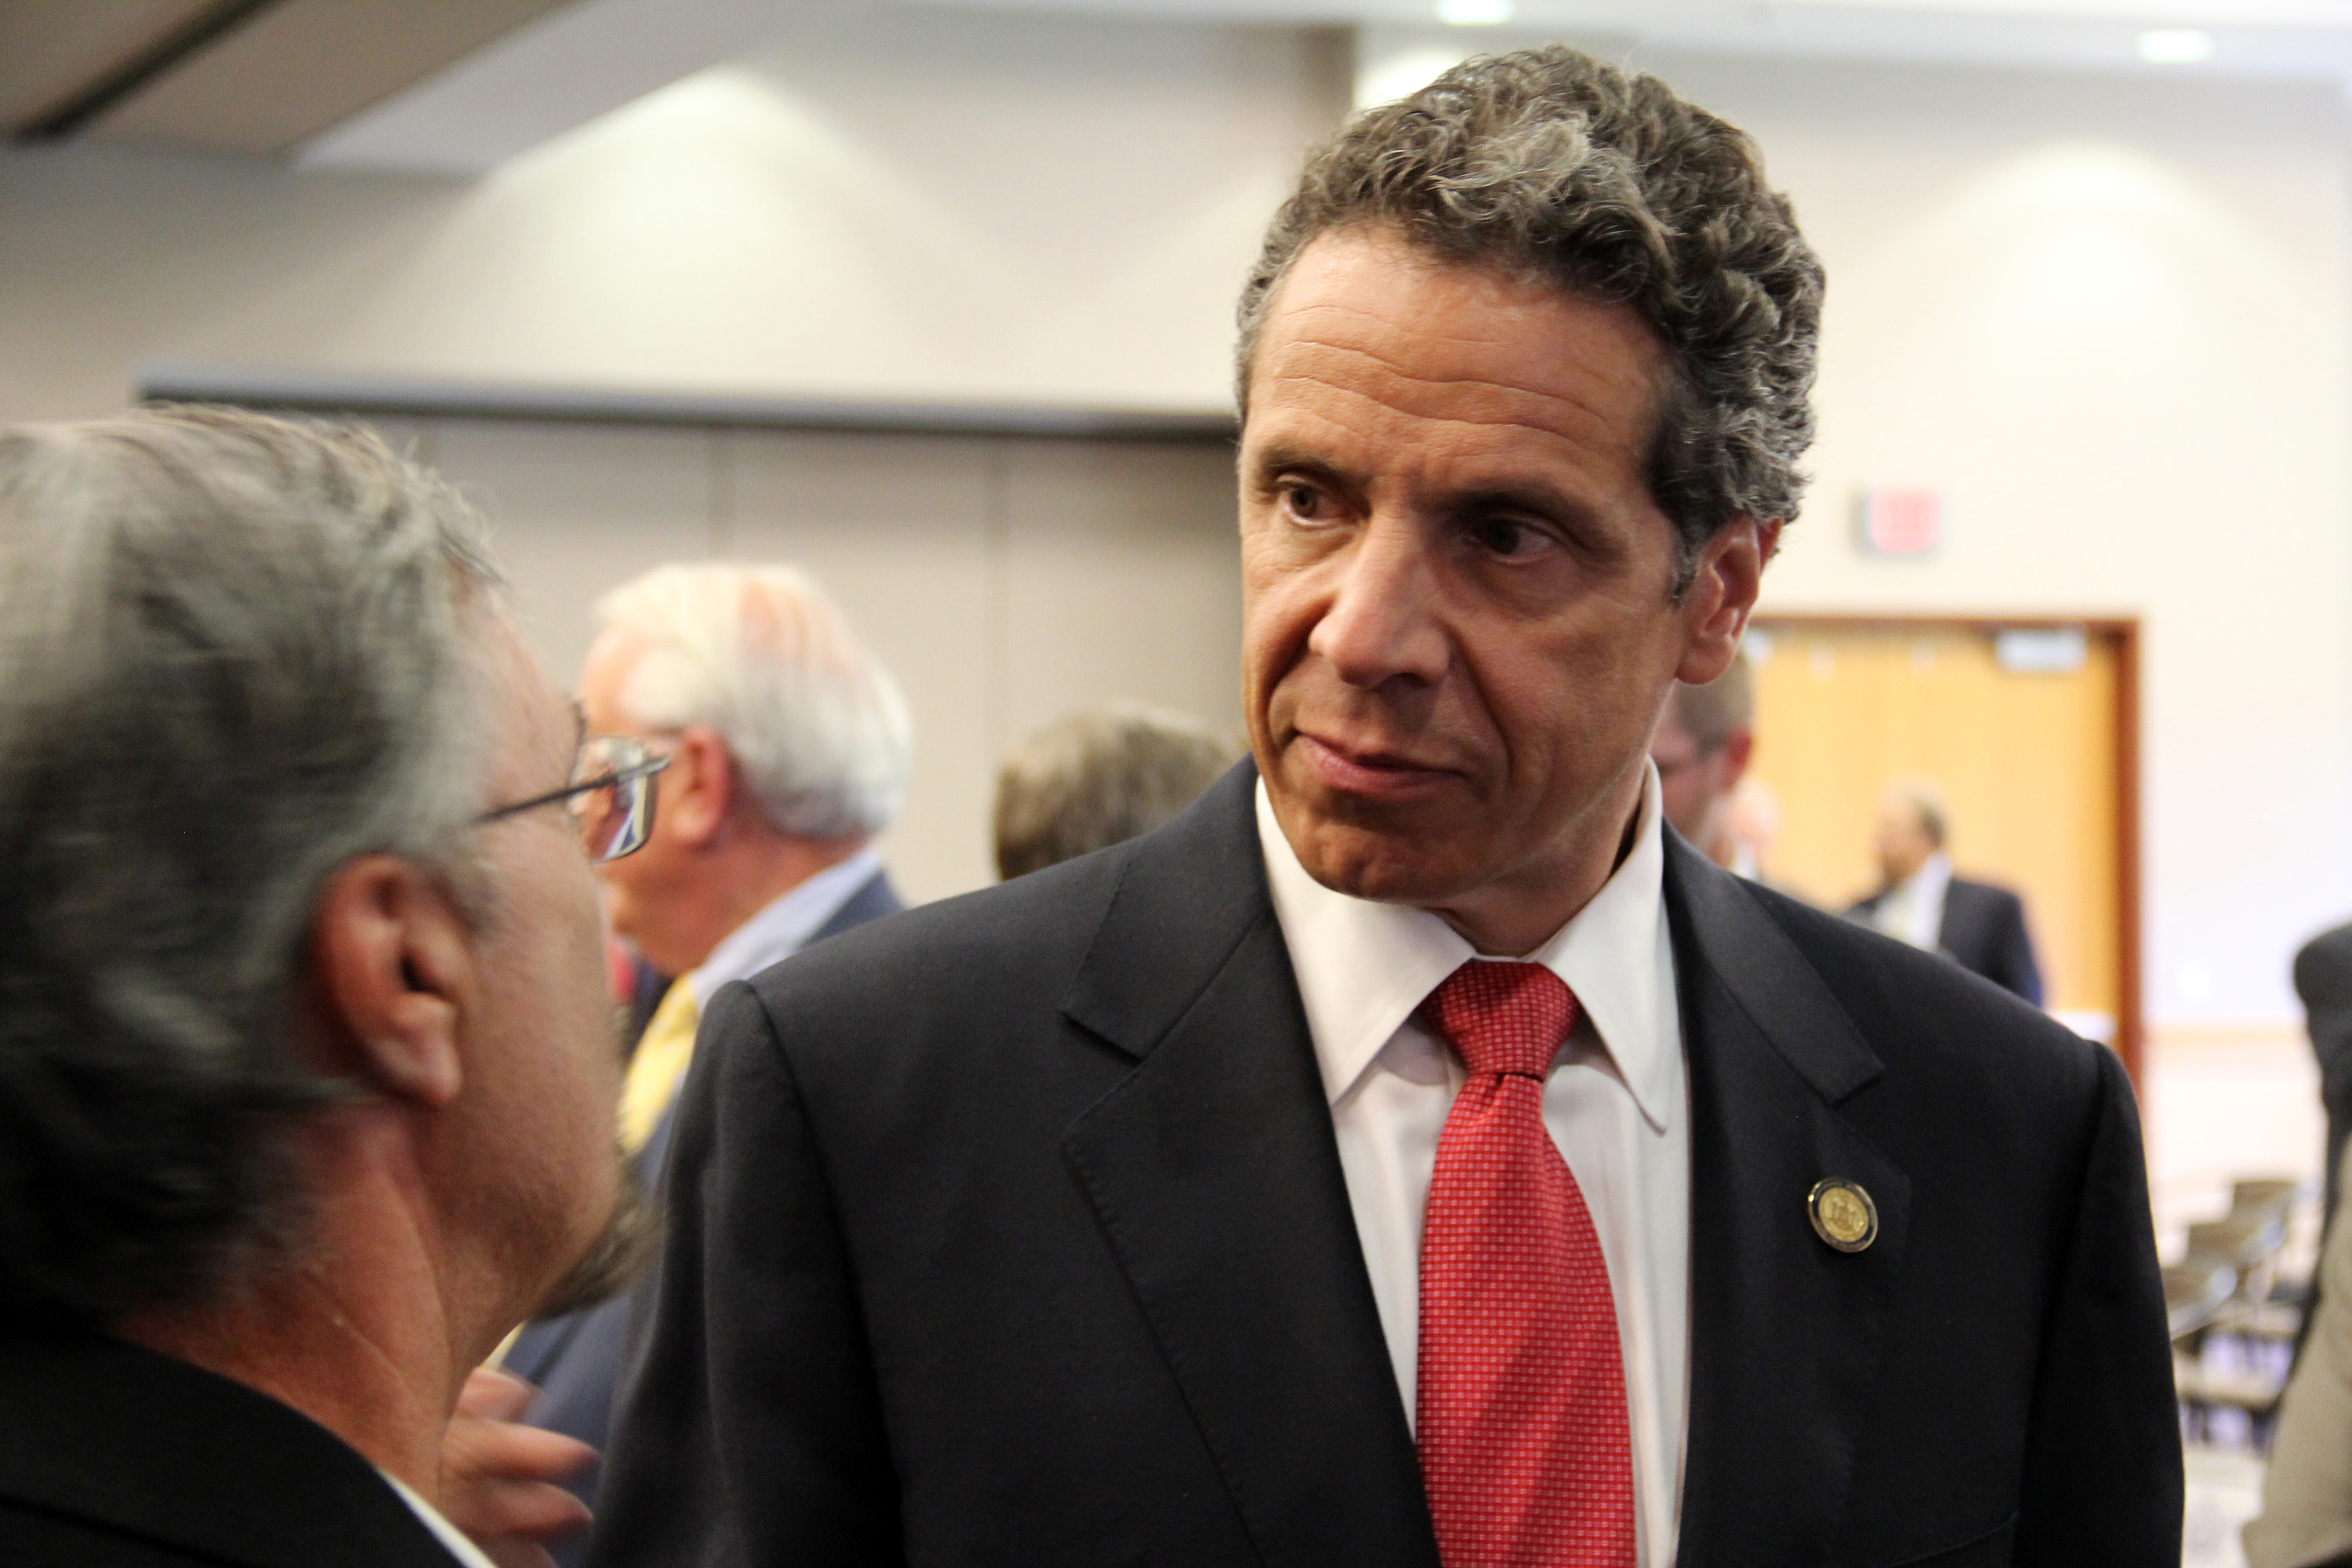 Andrew Cuomo, shown here at a 2011 Finger Lakes Regional Economic Development Council announcement.